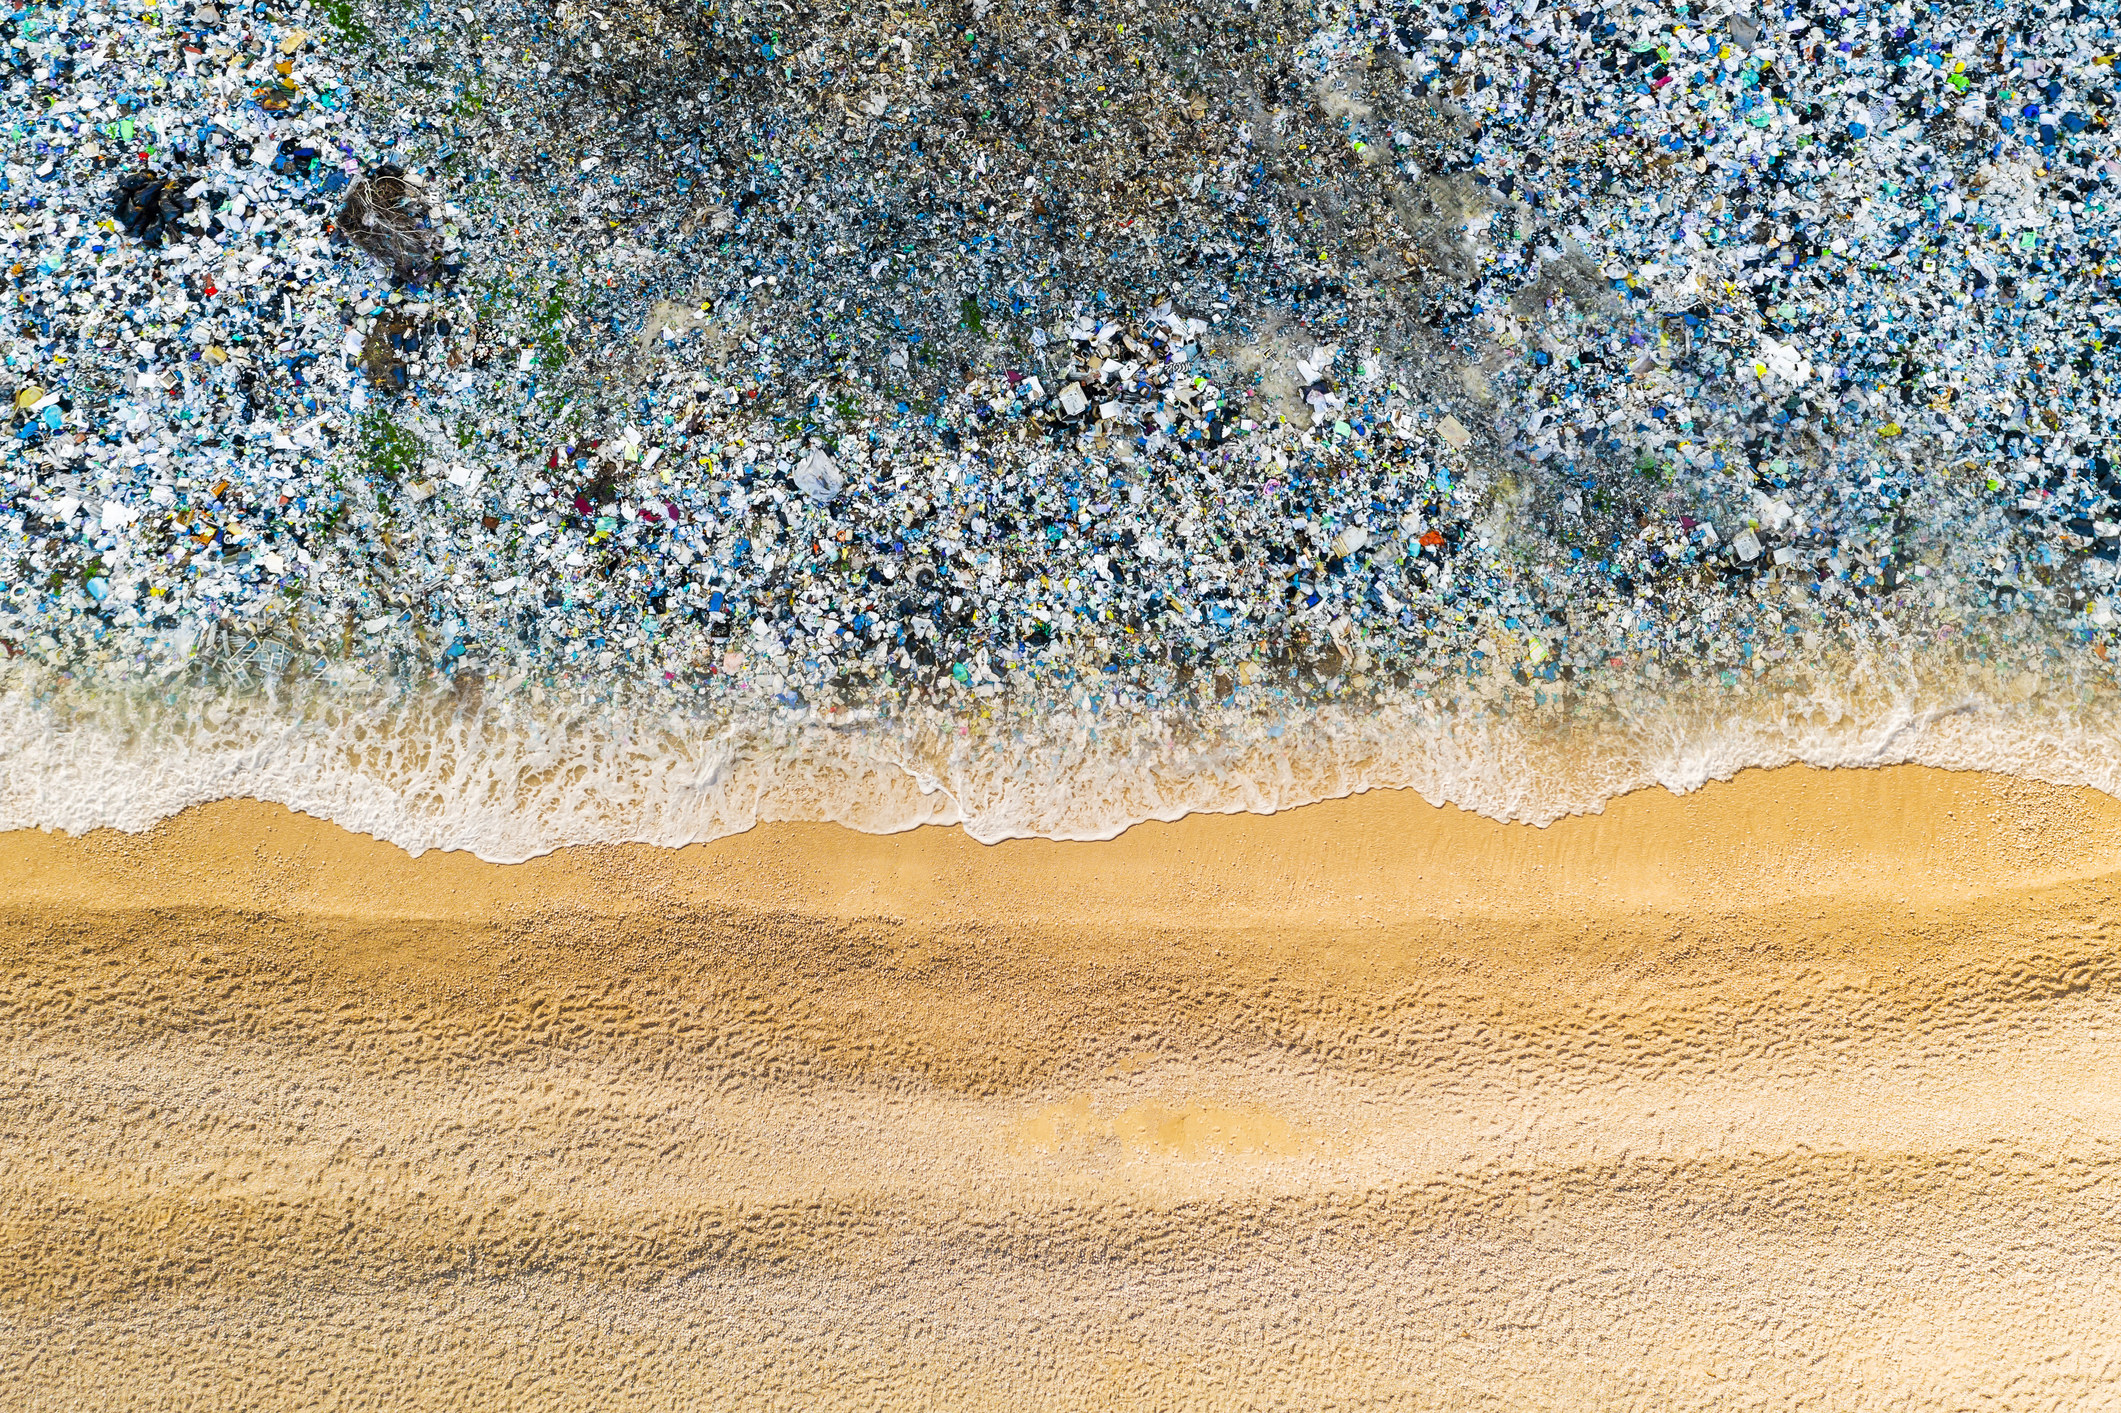 An image of trash washing up in the ocean